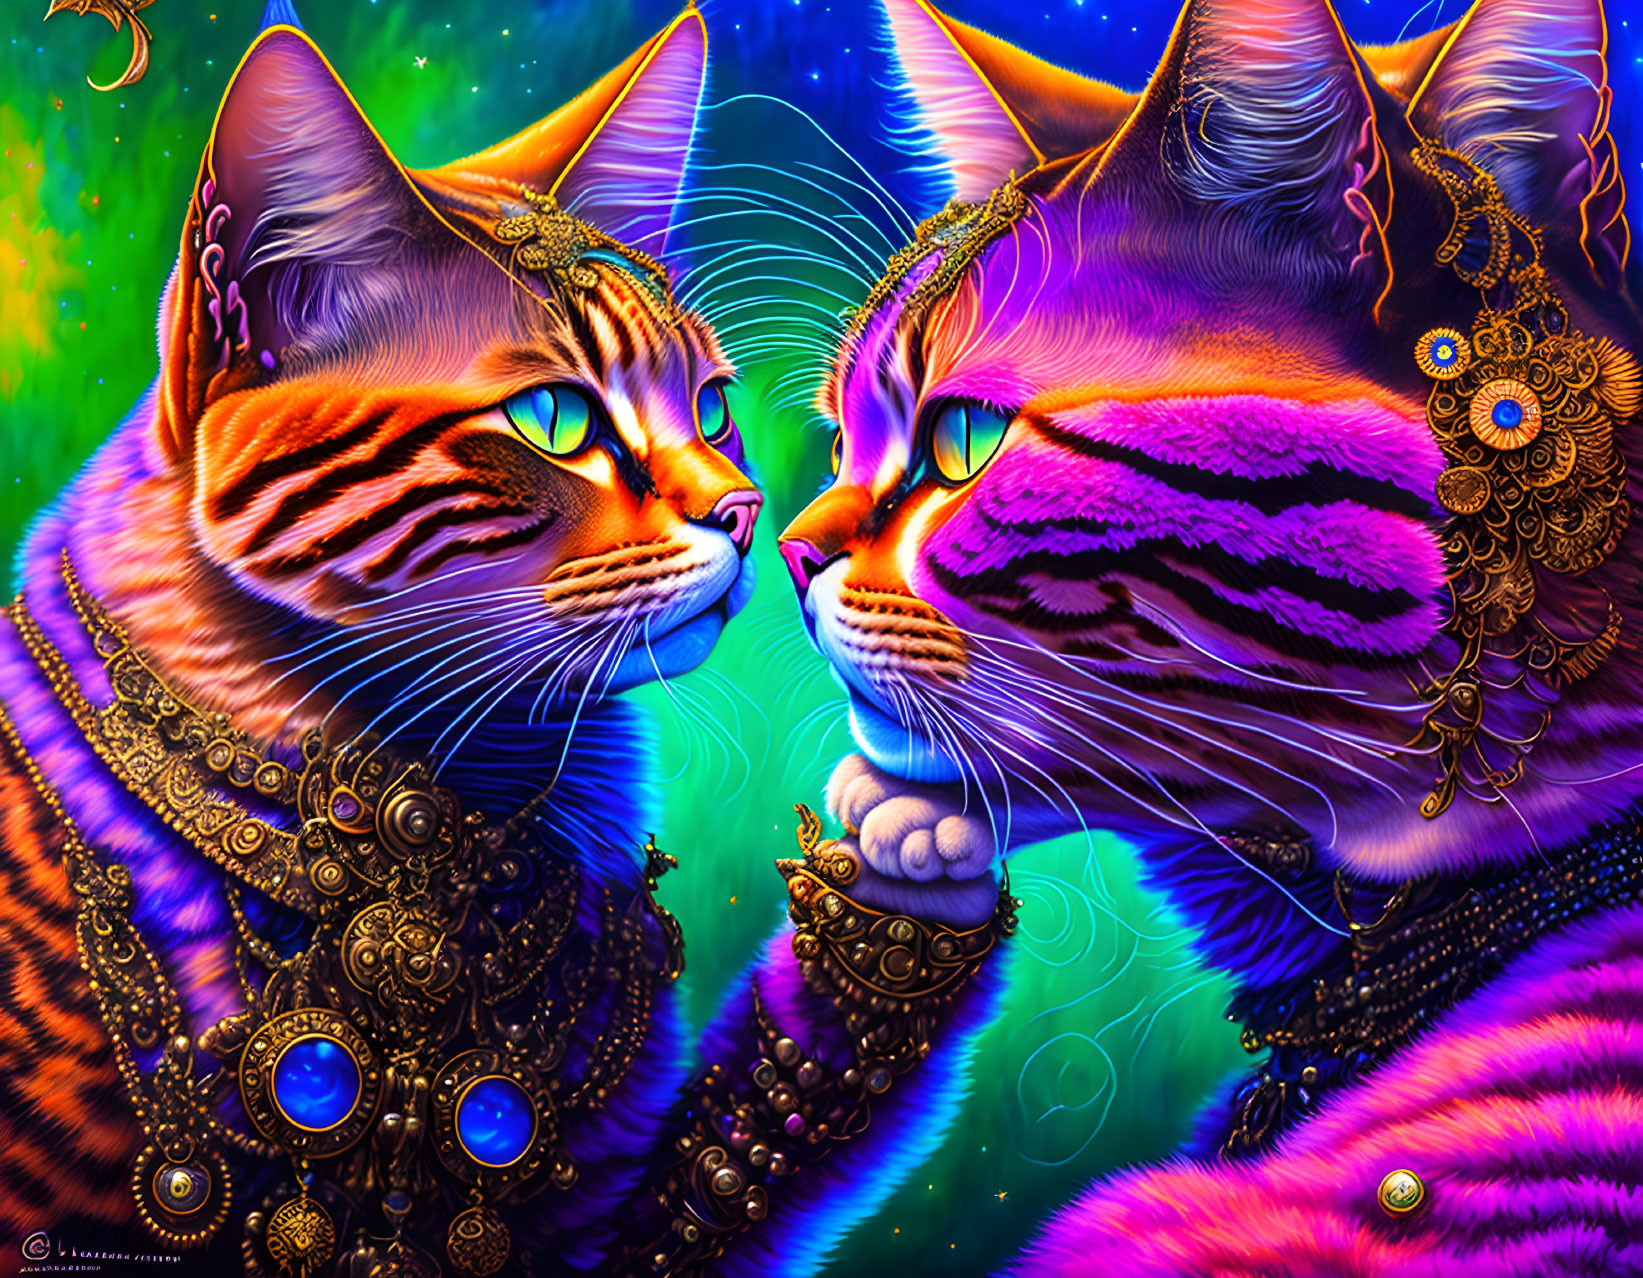 Vibrantly colored cats with human-like eyes on swirling background